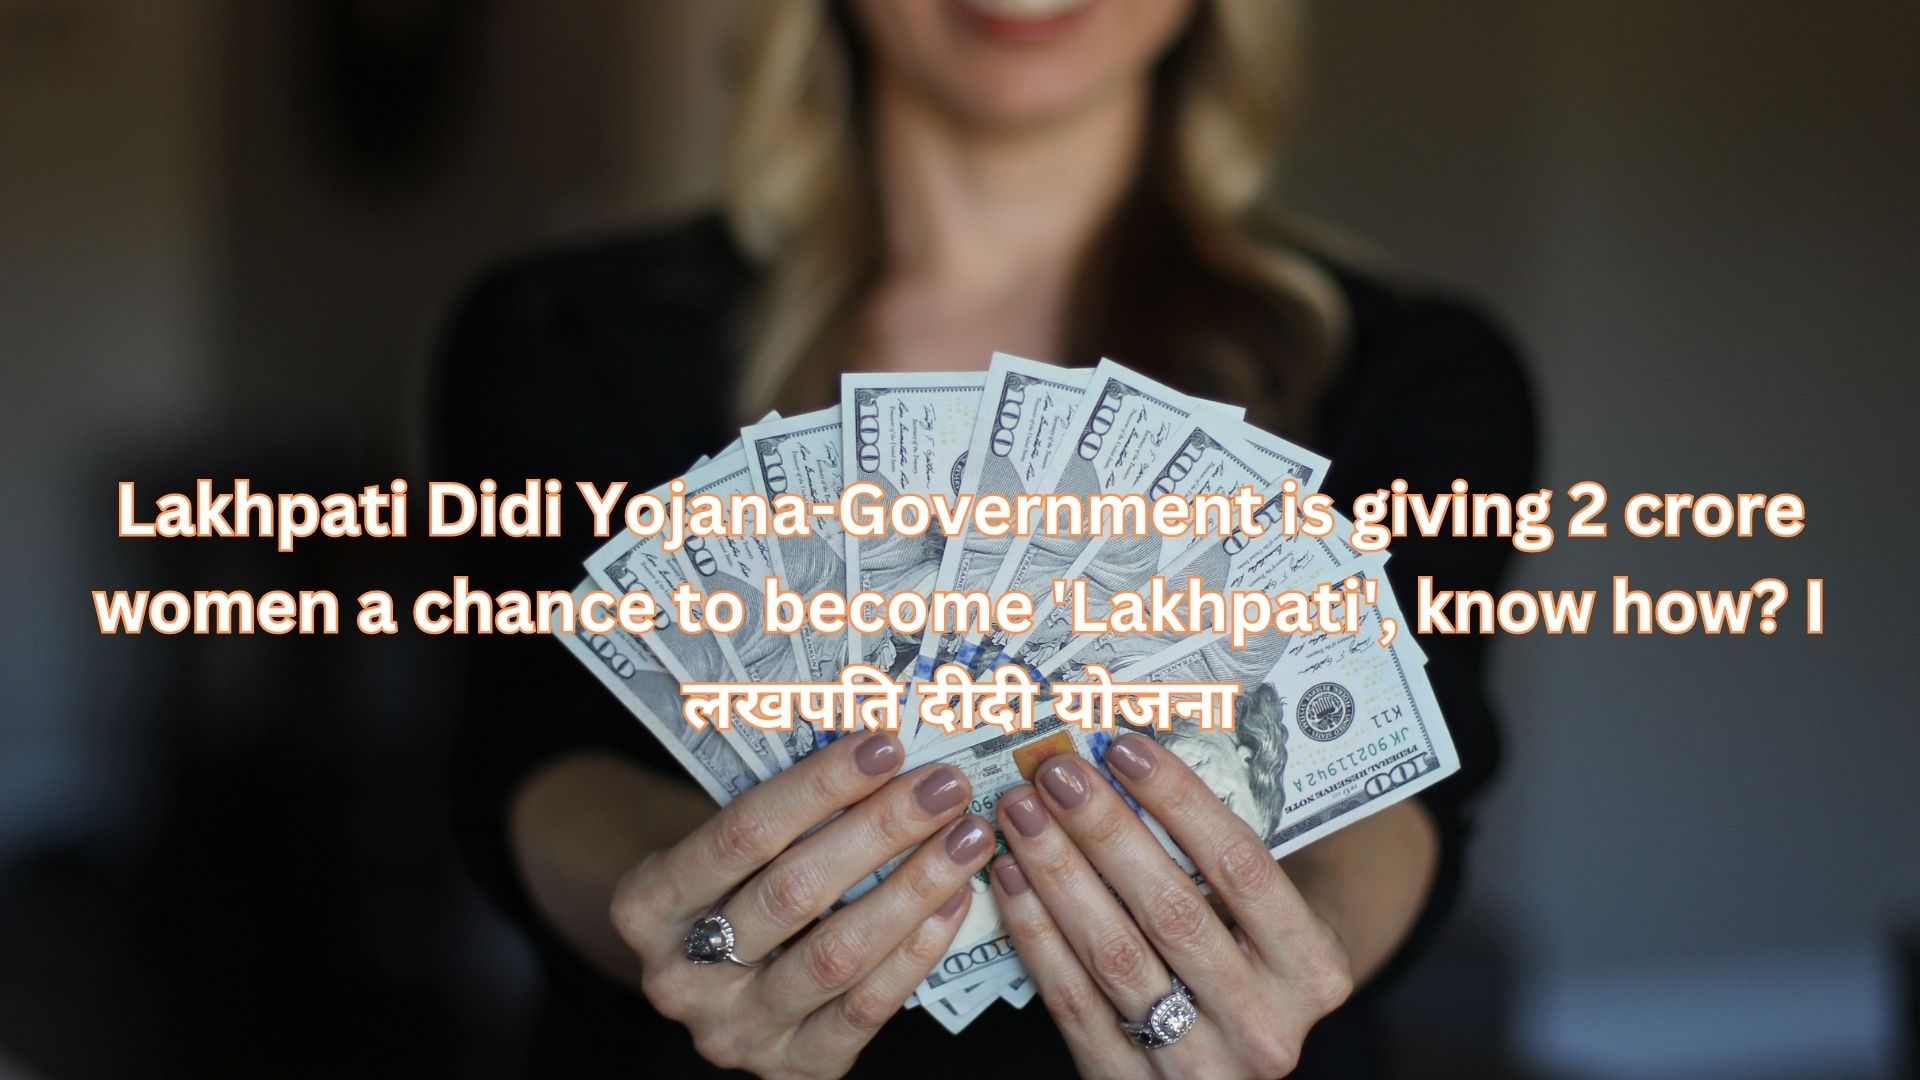 Lakhpati Didi Yojana-Government is giving 2 crore women a chance to become 'Lakhpati', know how? I लखपति दीदी योजना